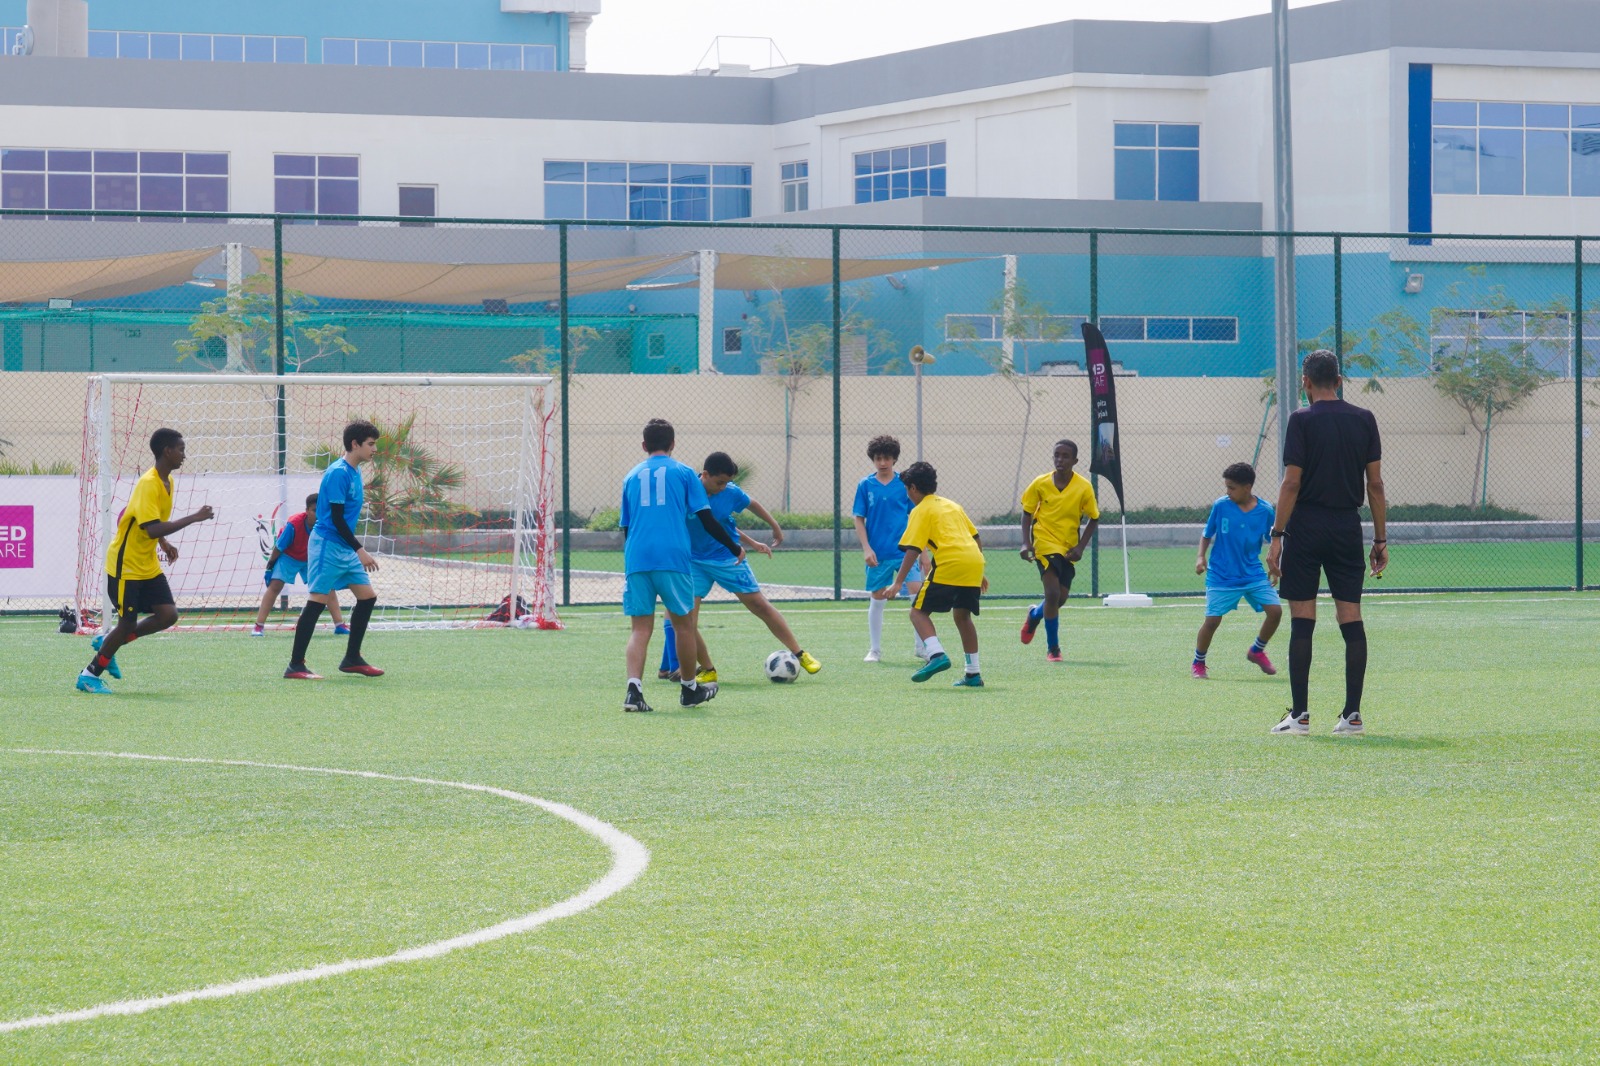 The schools championship was launched in Sharjah, with the participation of 288 students